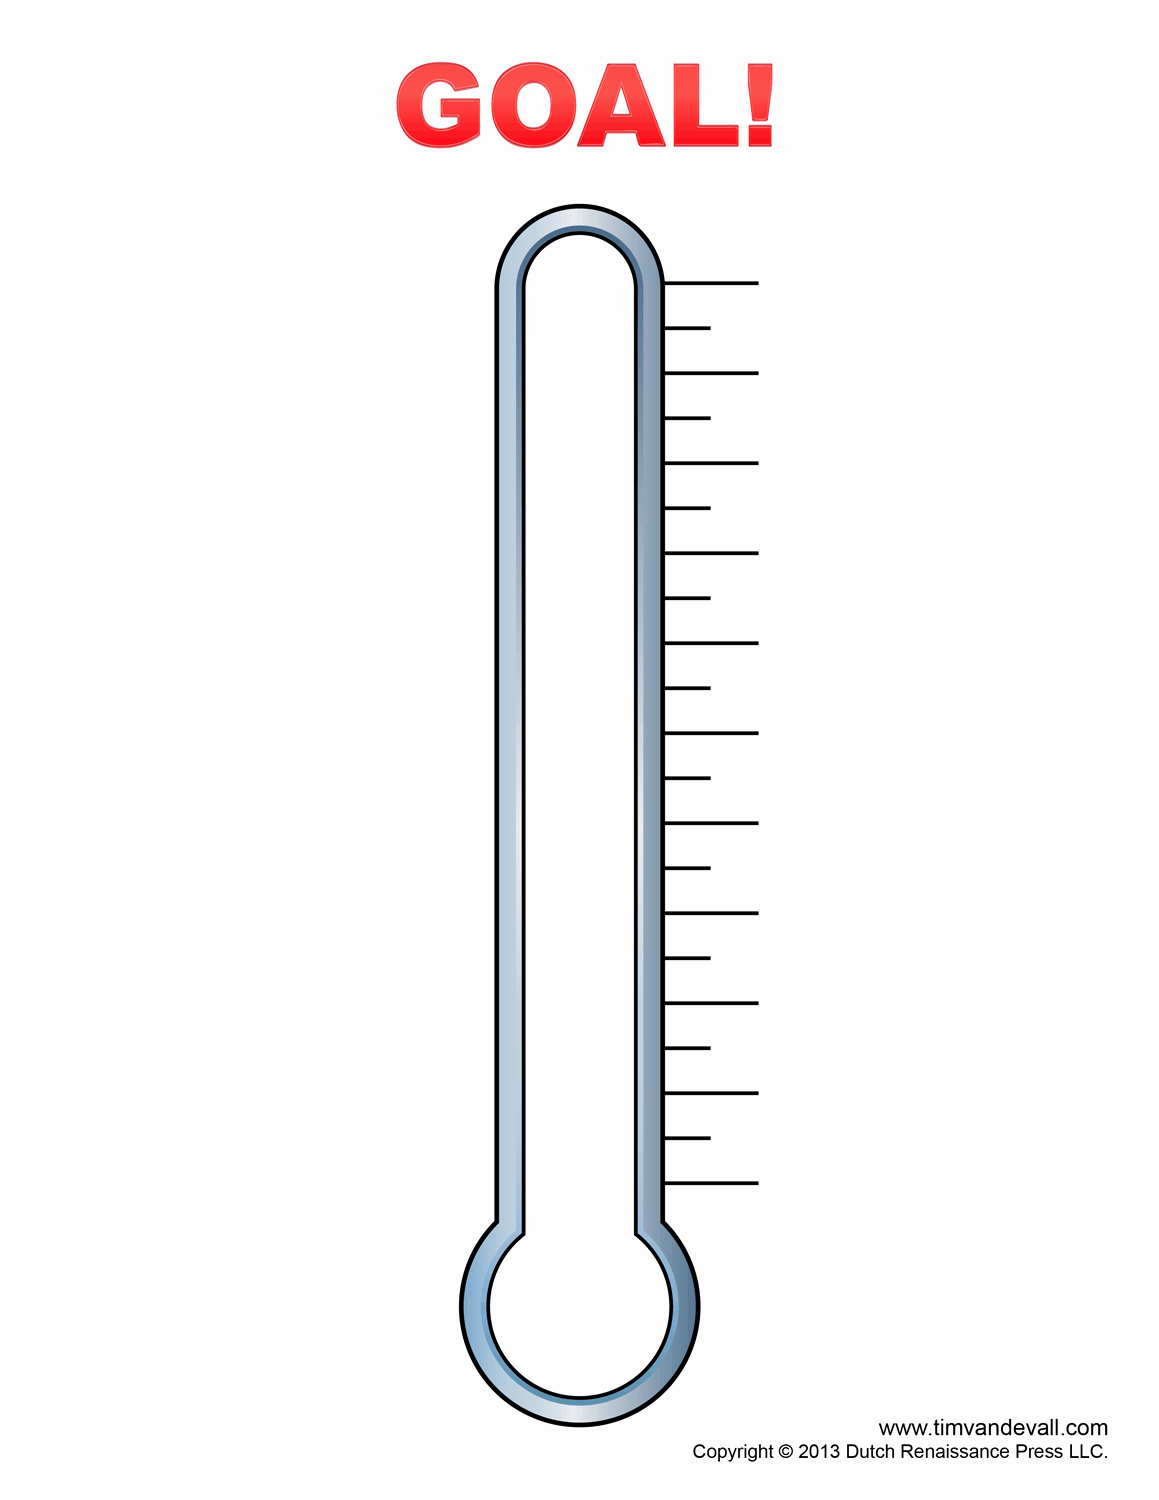 Fundraising thermometer Template Editable Fresh Fundraising thermometer Templates for Fundraising events